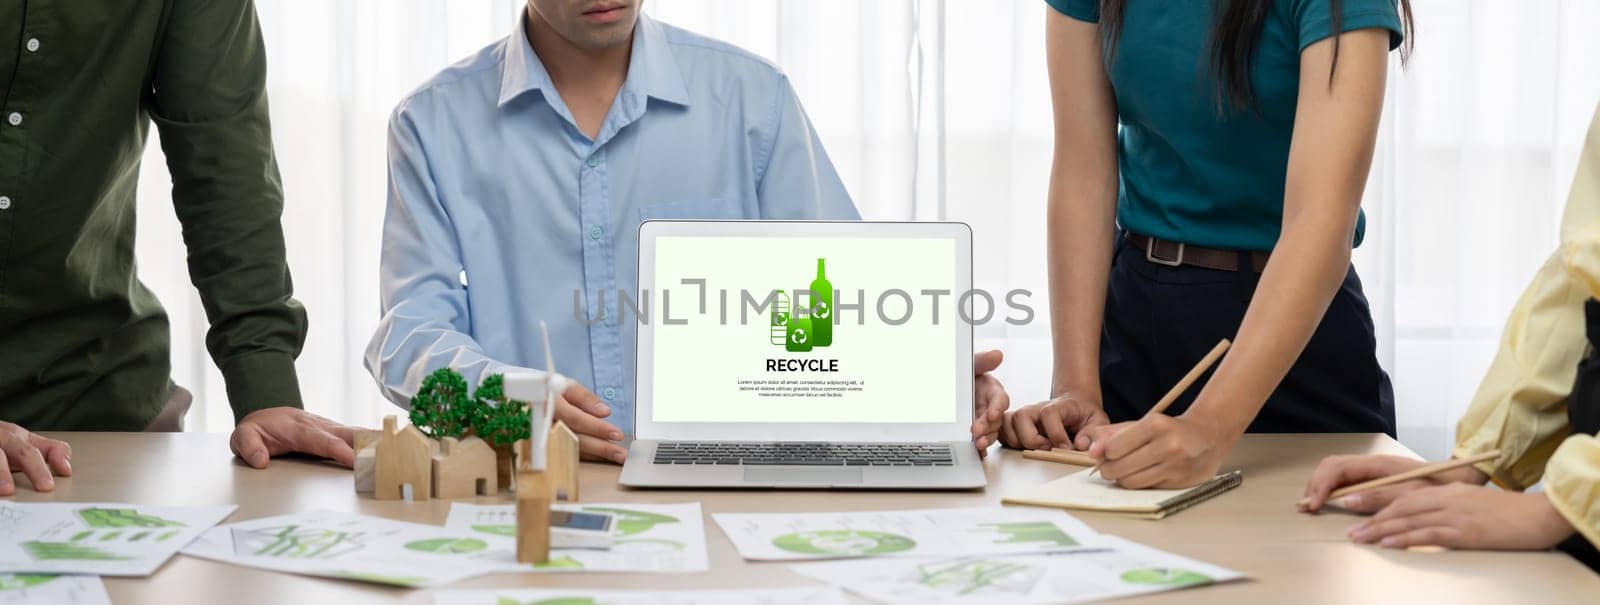 Recycle packaging displayed on laptop at a green business meeting. Delineation by biancoblue